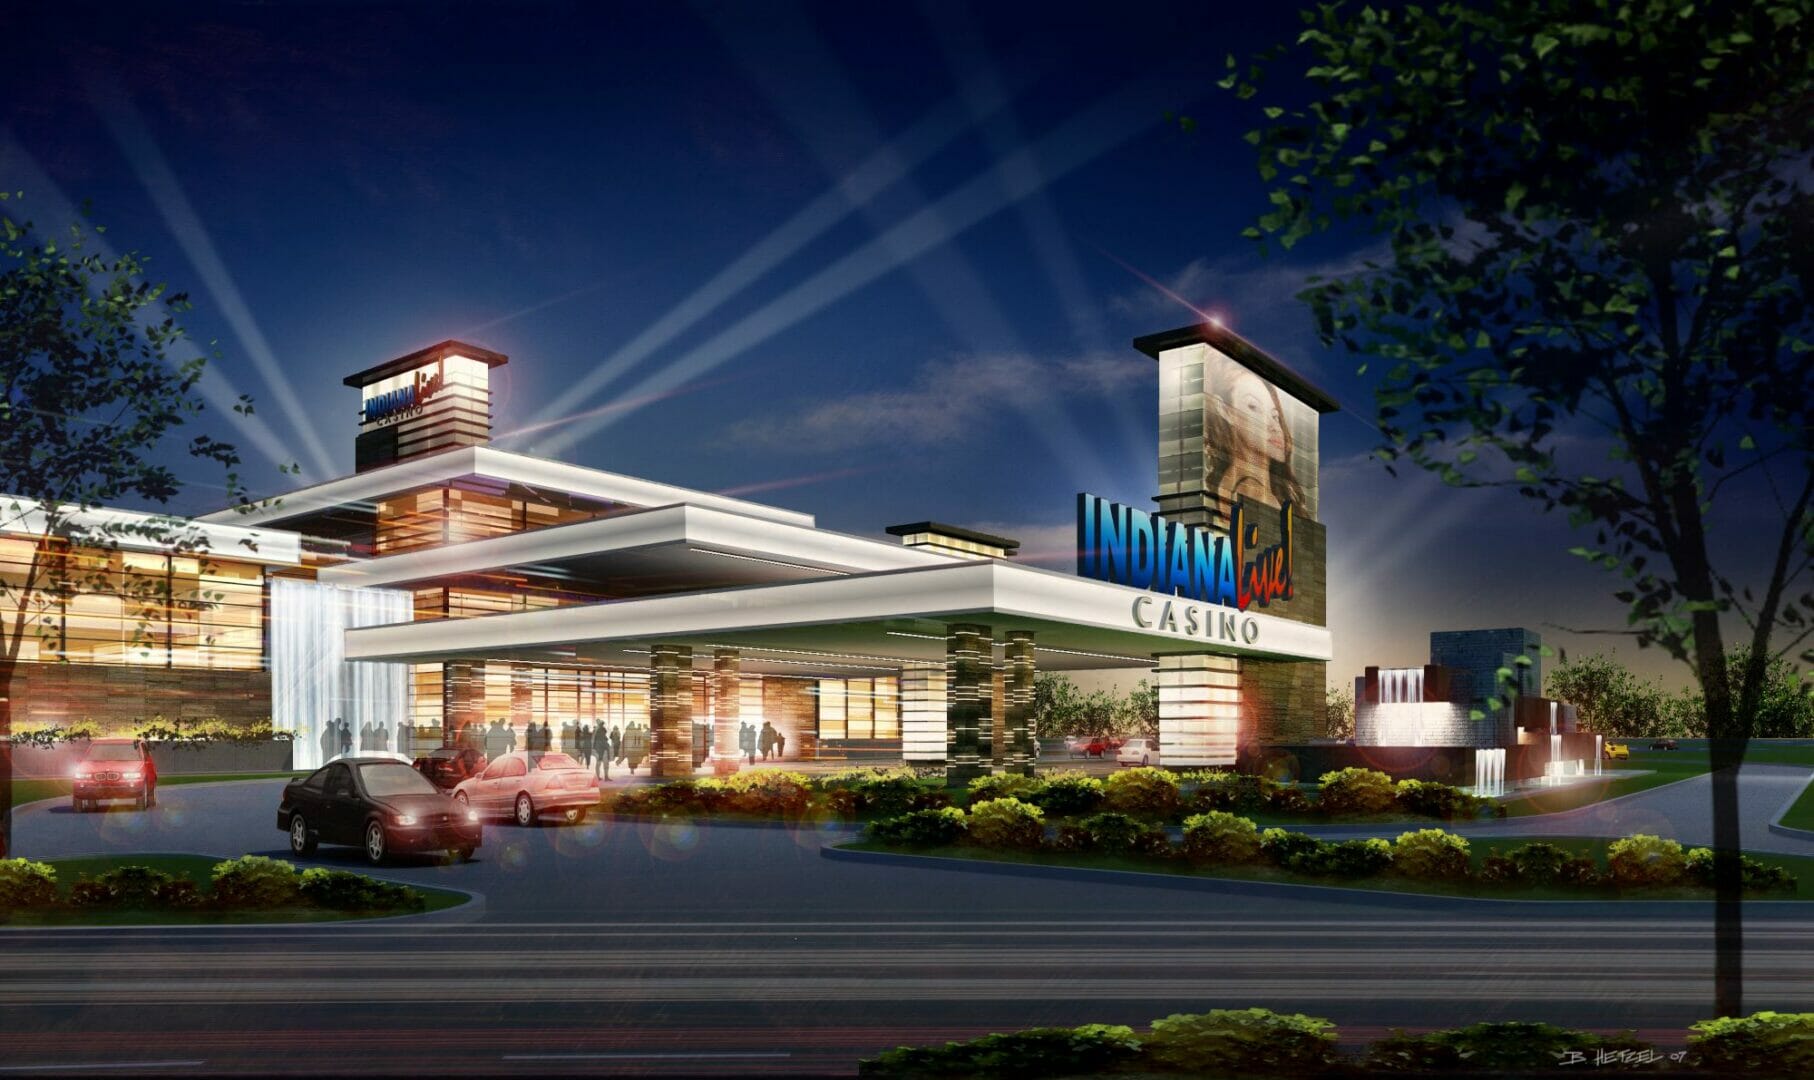 Indiana Live Casino-Shelbyville IN